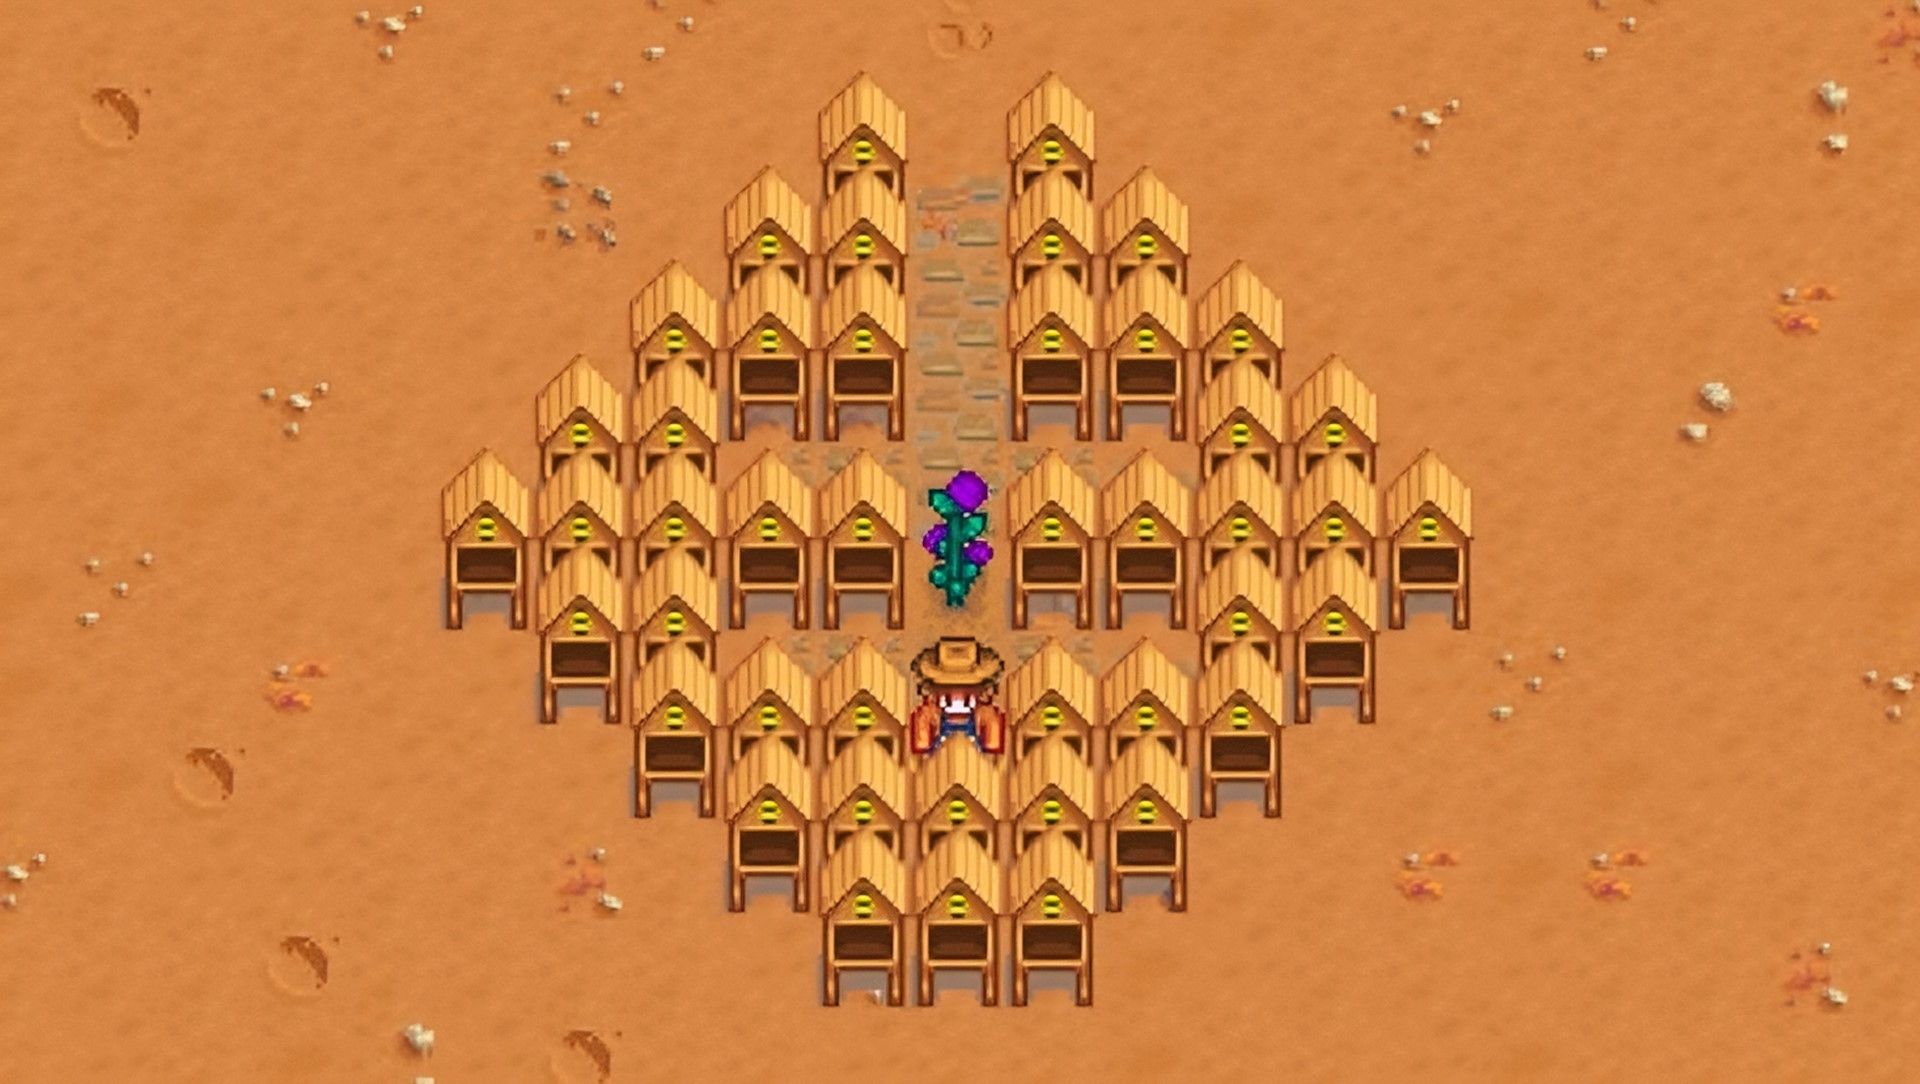 Stardew Valley: Ultimate Honey Guide - Get Rich through Bee Houses